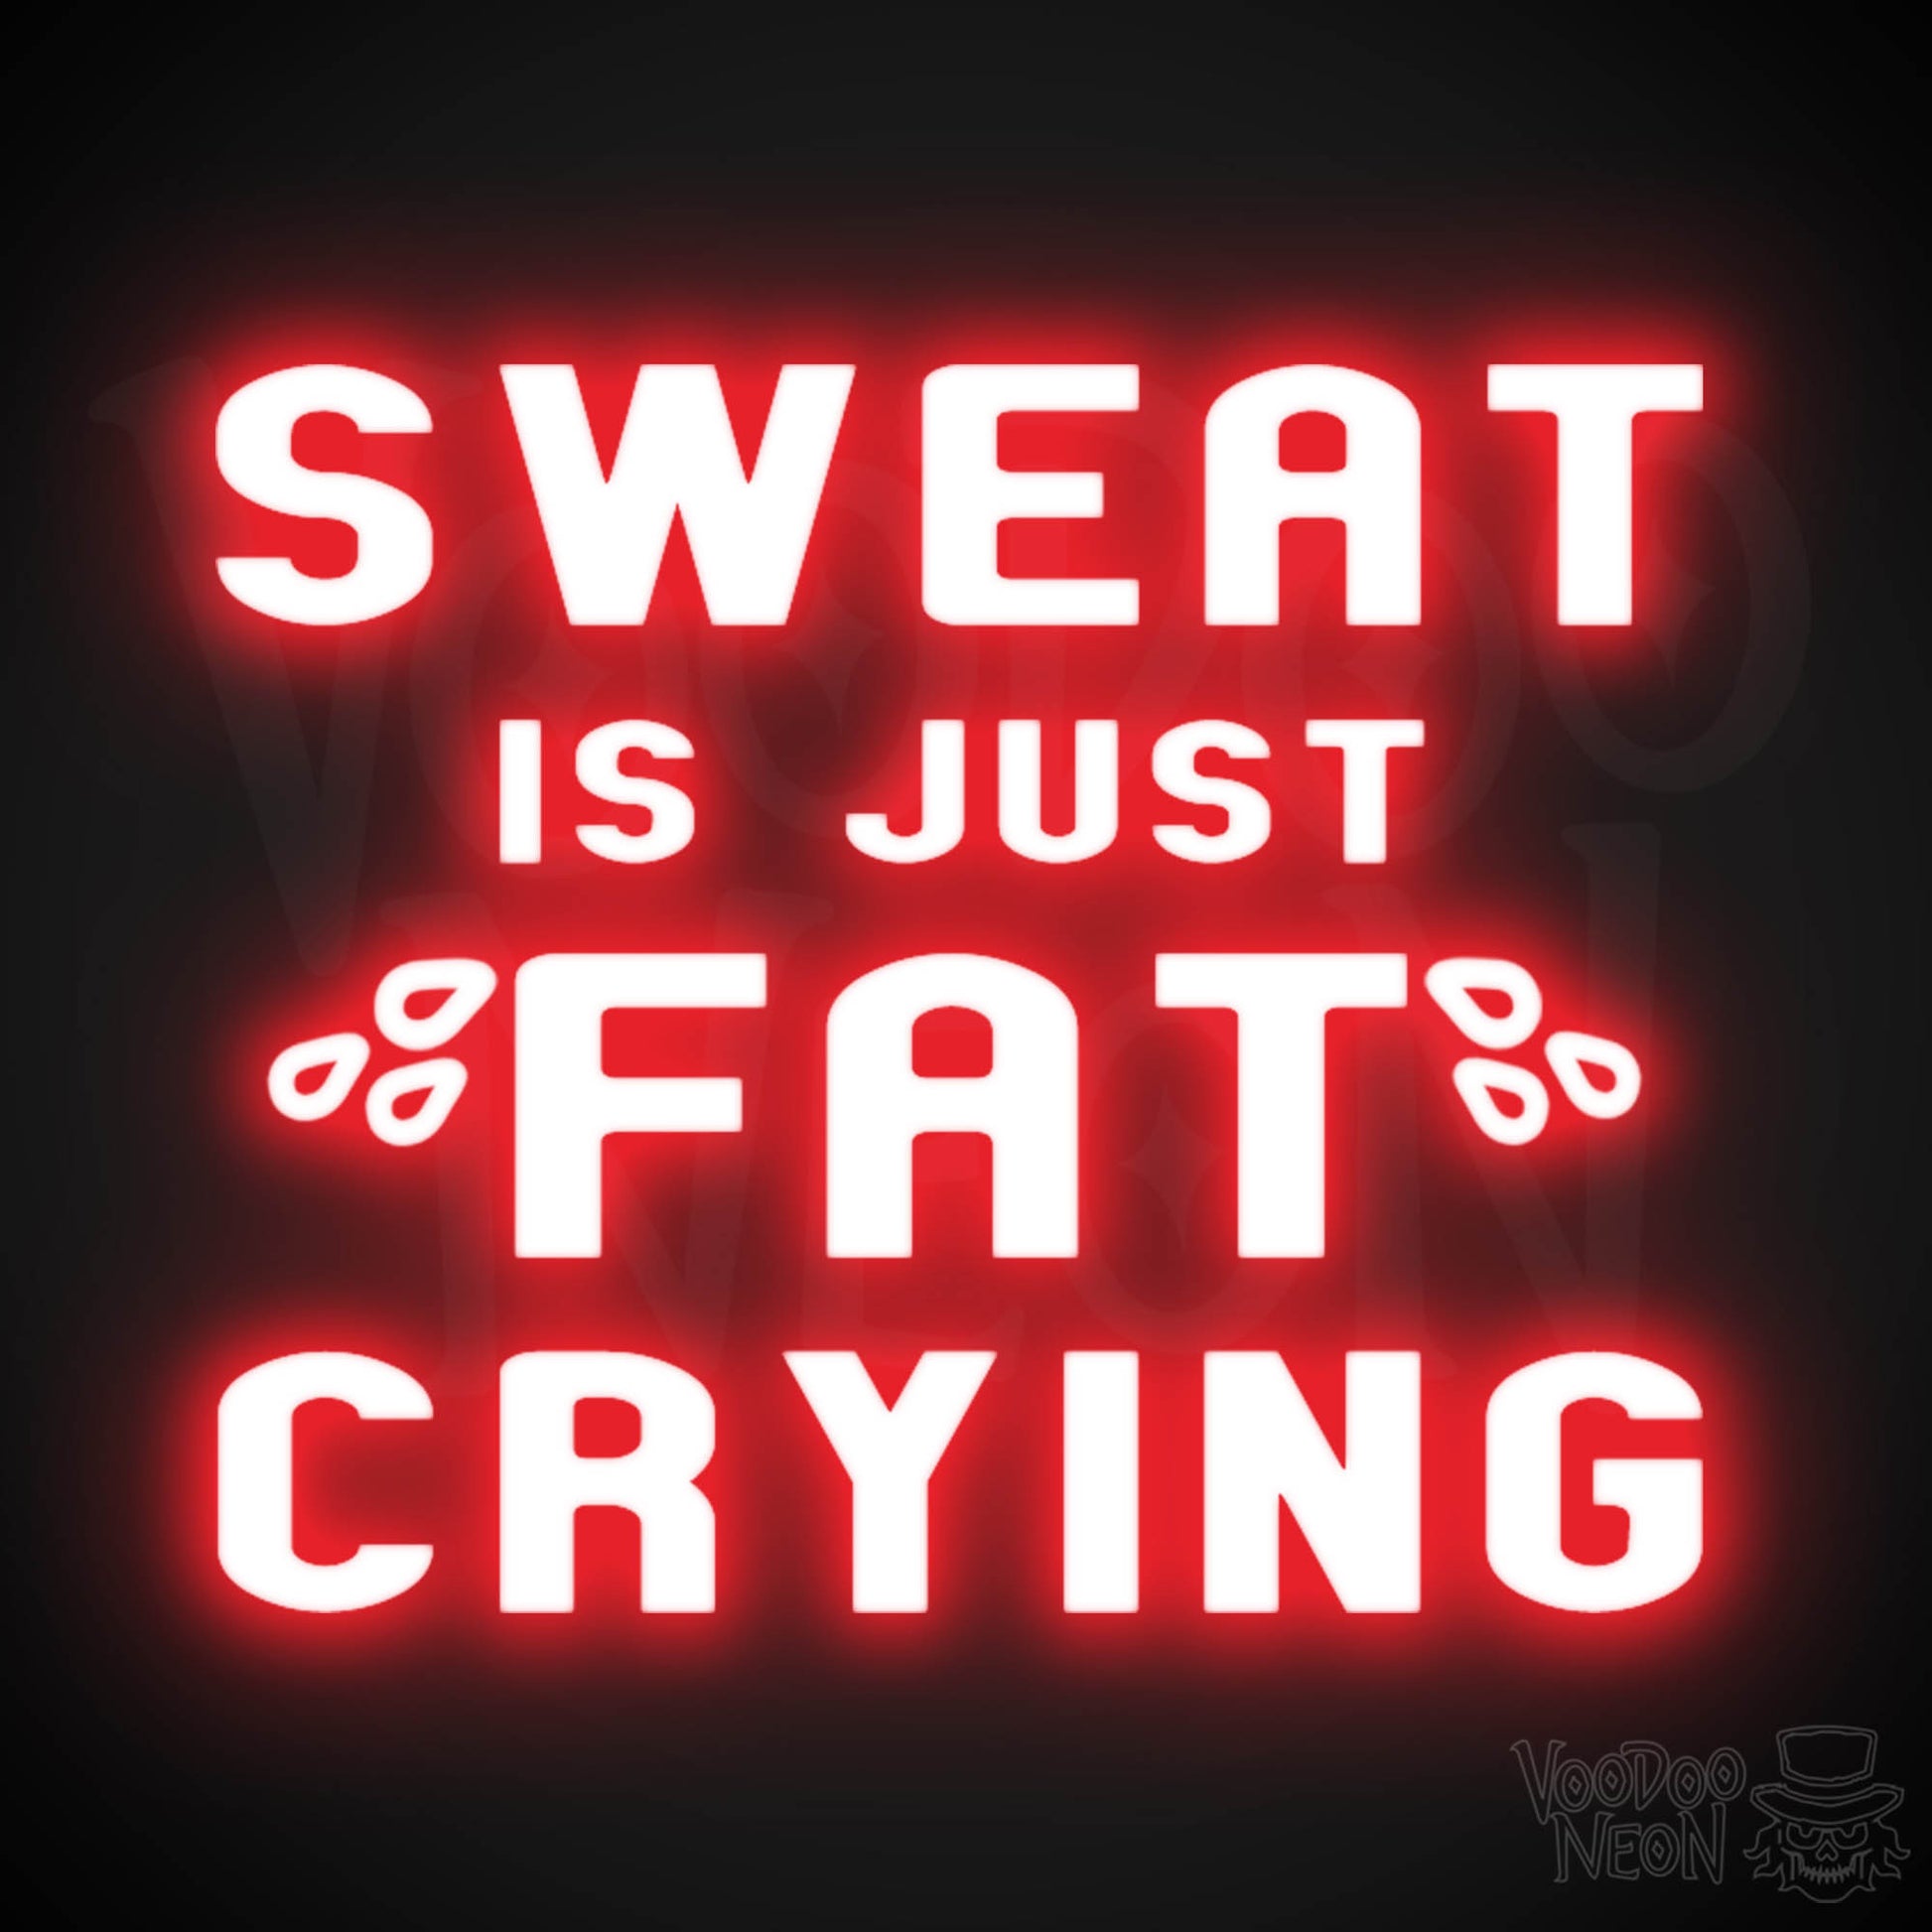 Sweat Is Just Fat Crying Neon Sign - Sweat Is Just Fat Crying Sign - LED Lights - Color Red